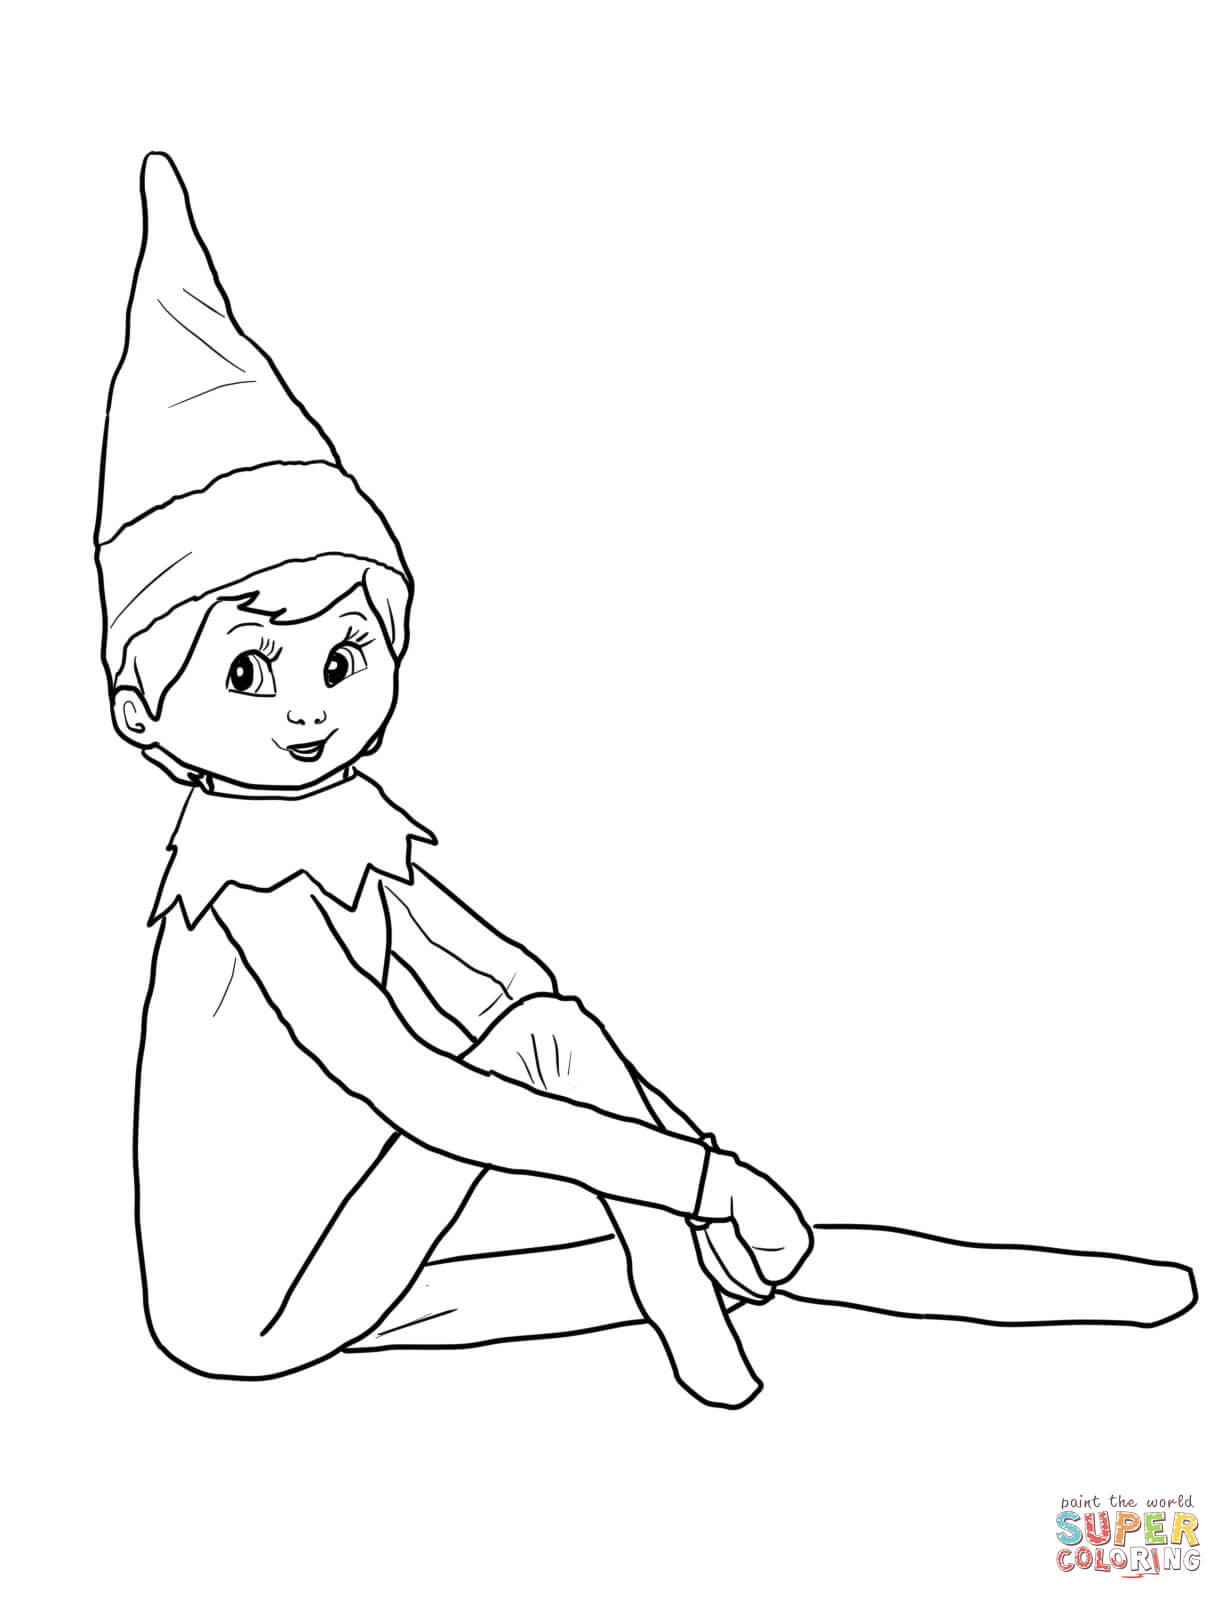 Elf Coloring Pages For Boys
 Elf on the Shelf coloring page